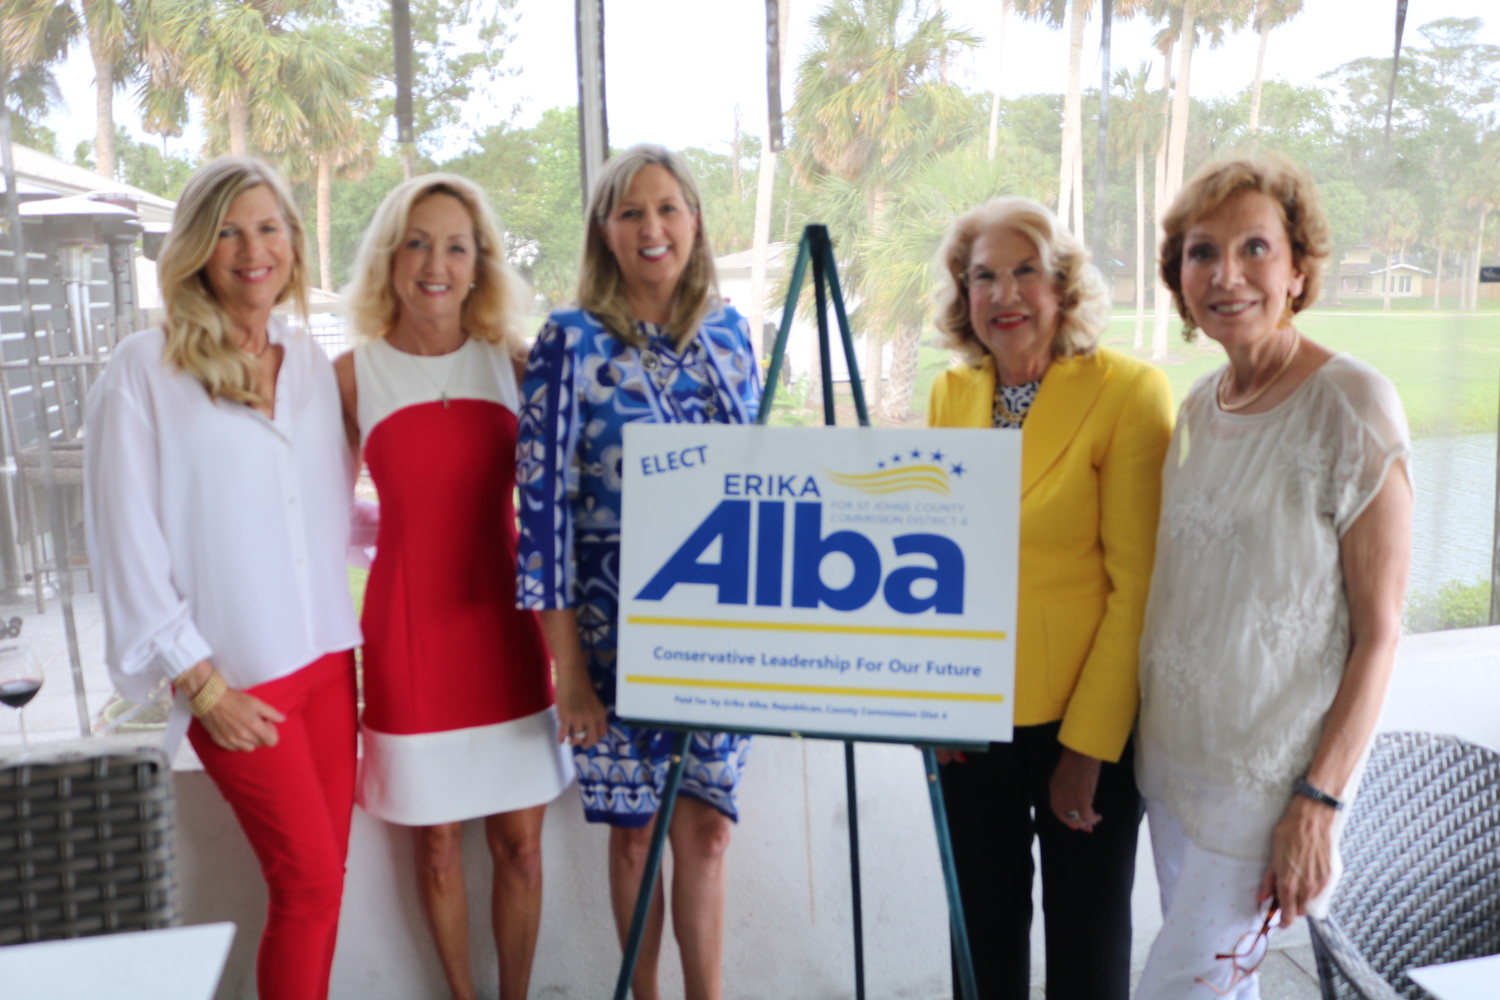 St. Johns County Commission District 4 candidate Erika Alba (center) poses with Pam D. Paul, Diane Scherff, Pam Y. Paul and Earliene Shipper at a reception held Tuesday, May 22 at 3 Palms Grille in support of her campaign.